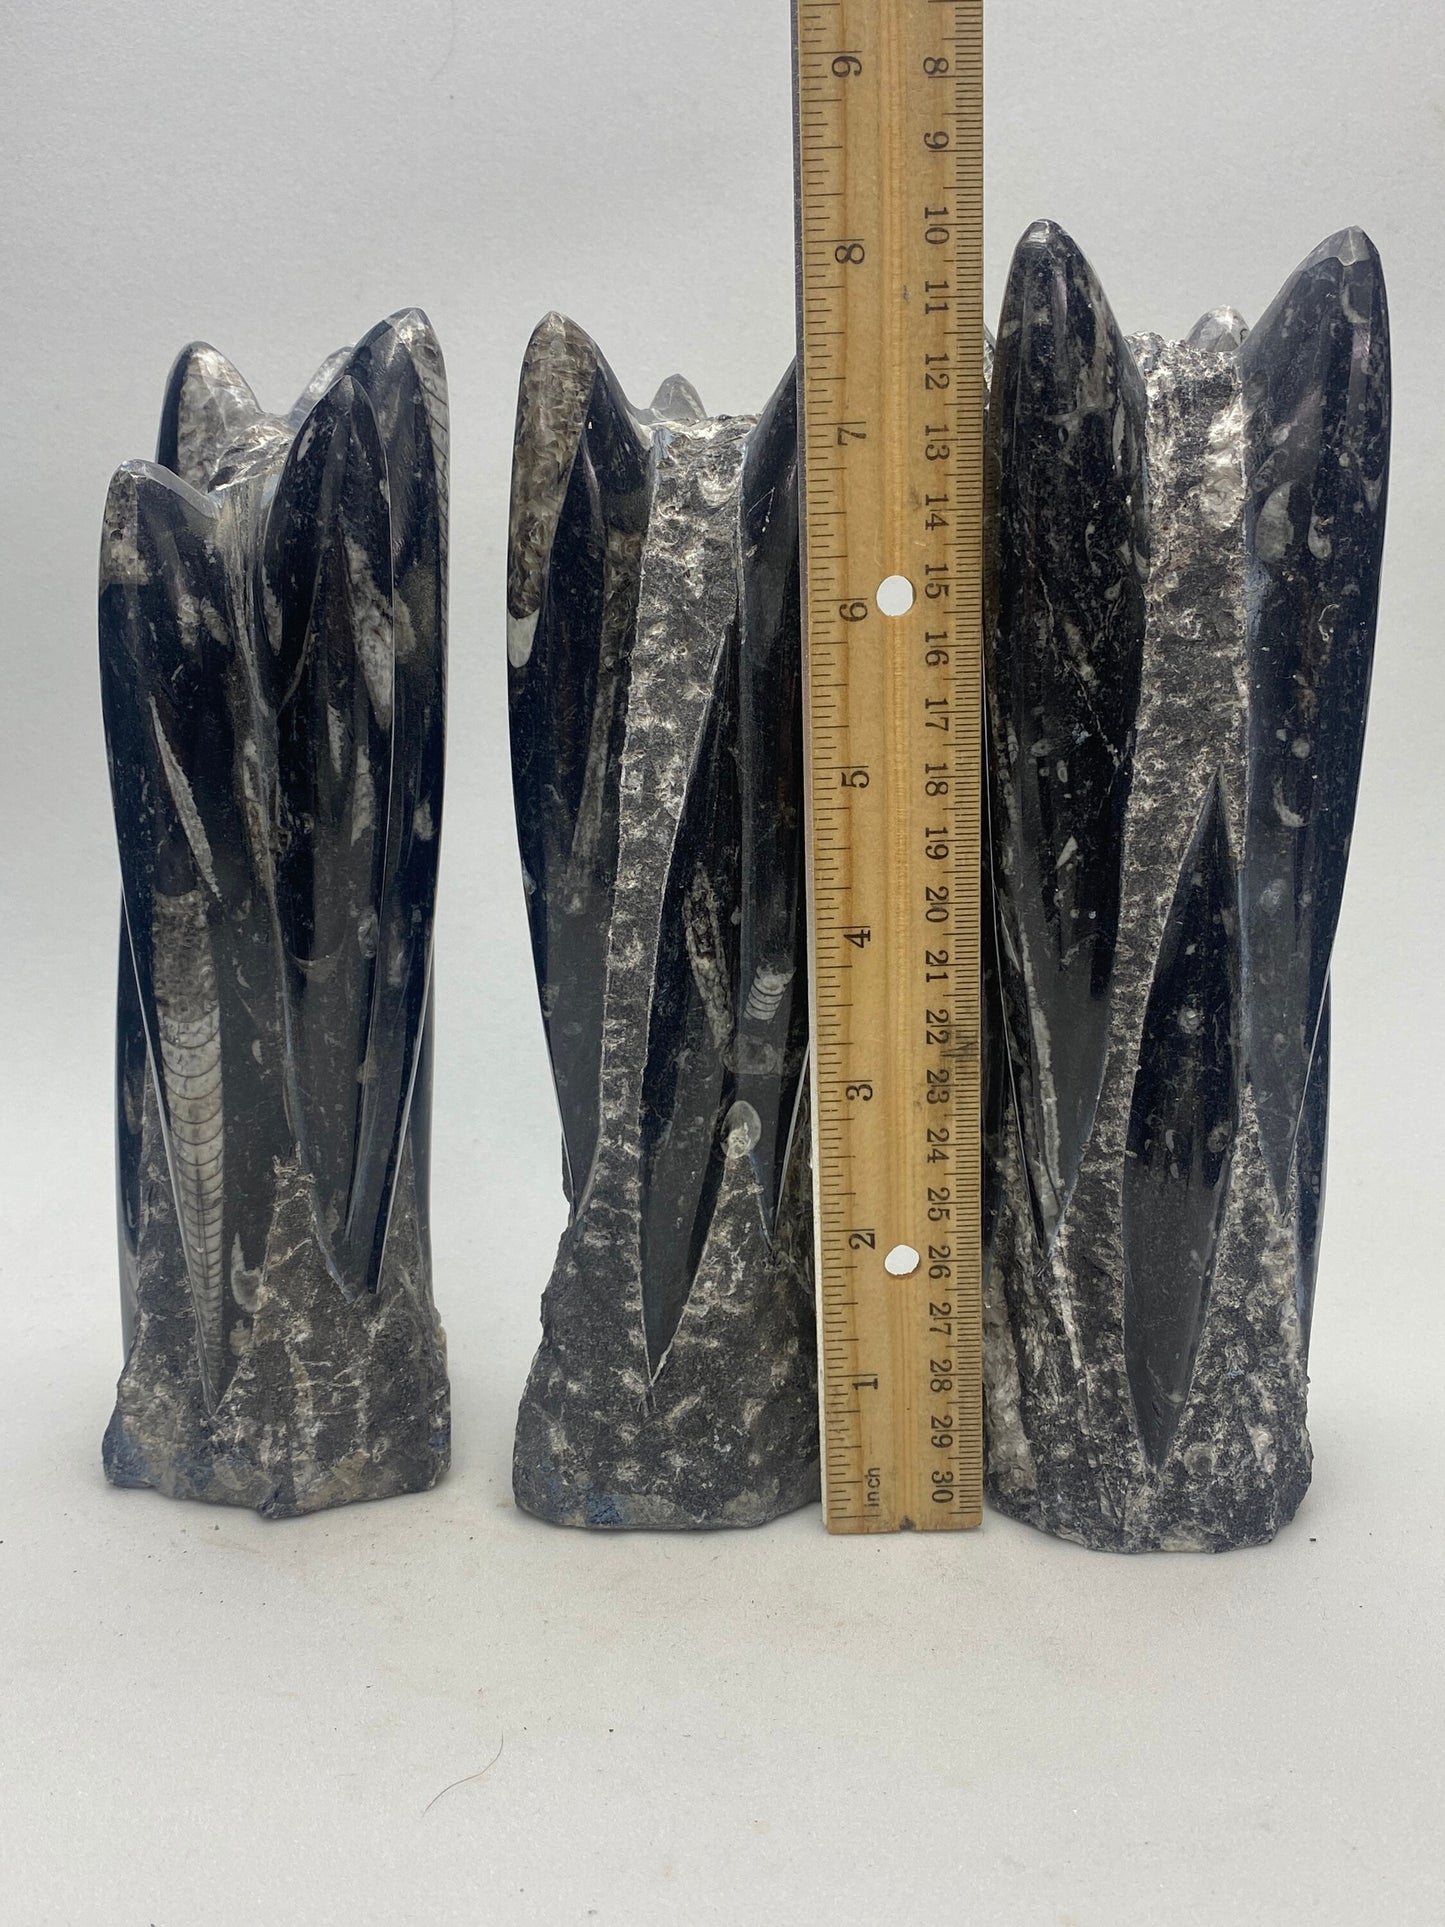 Orthoceras fossil tower, freestanding fossil cephalopod